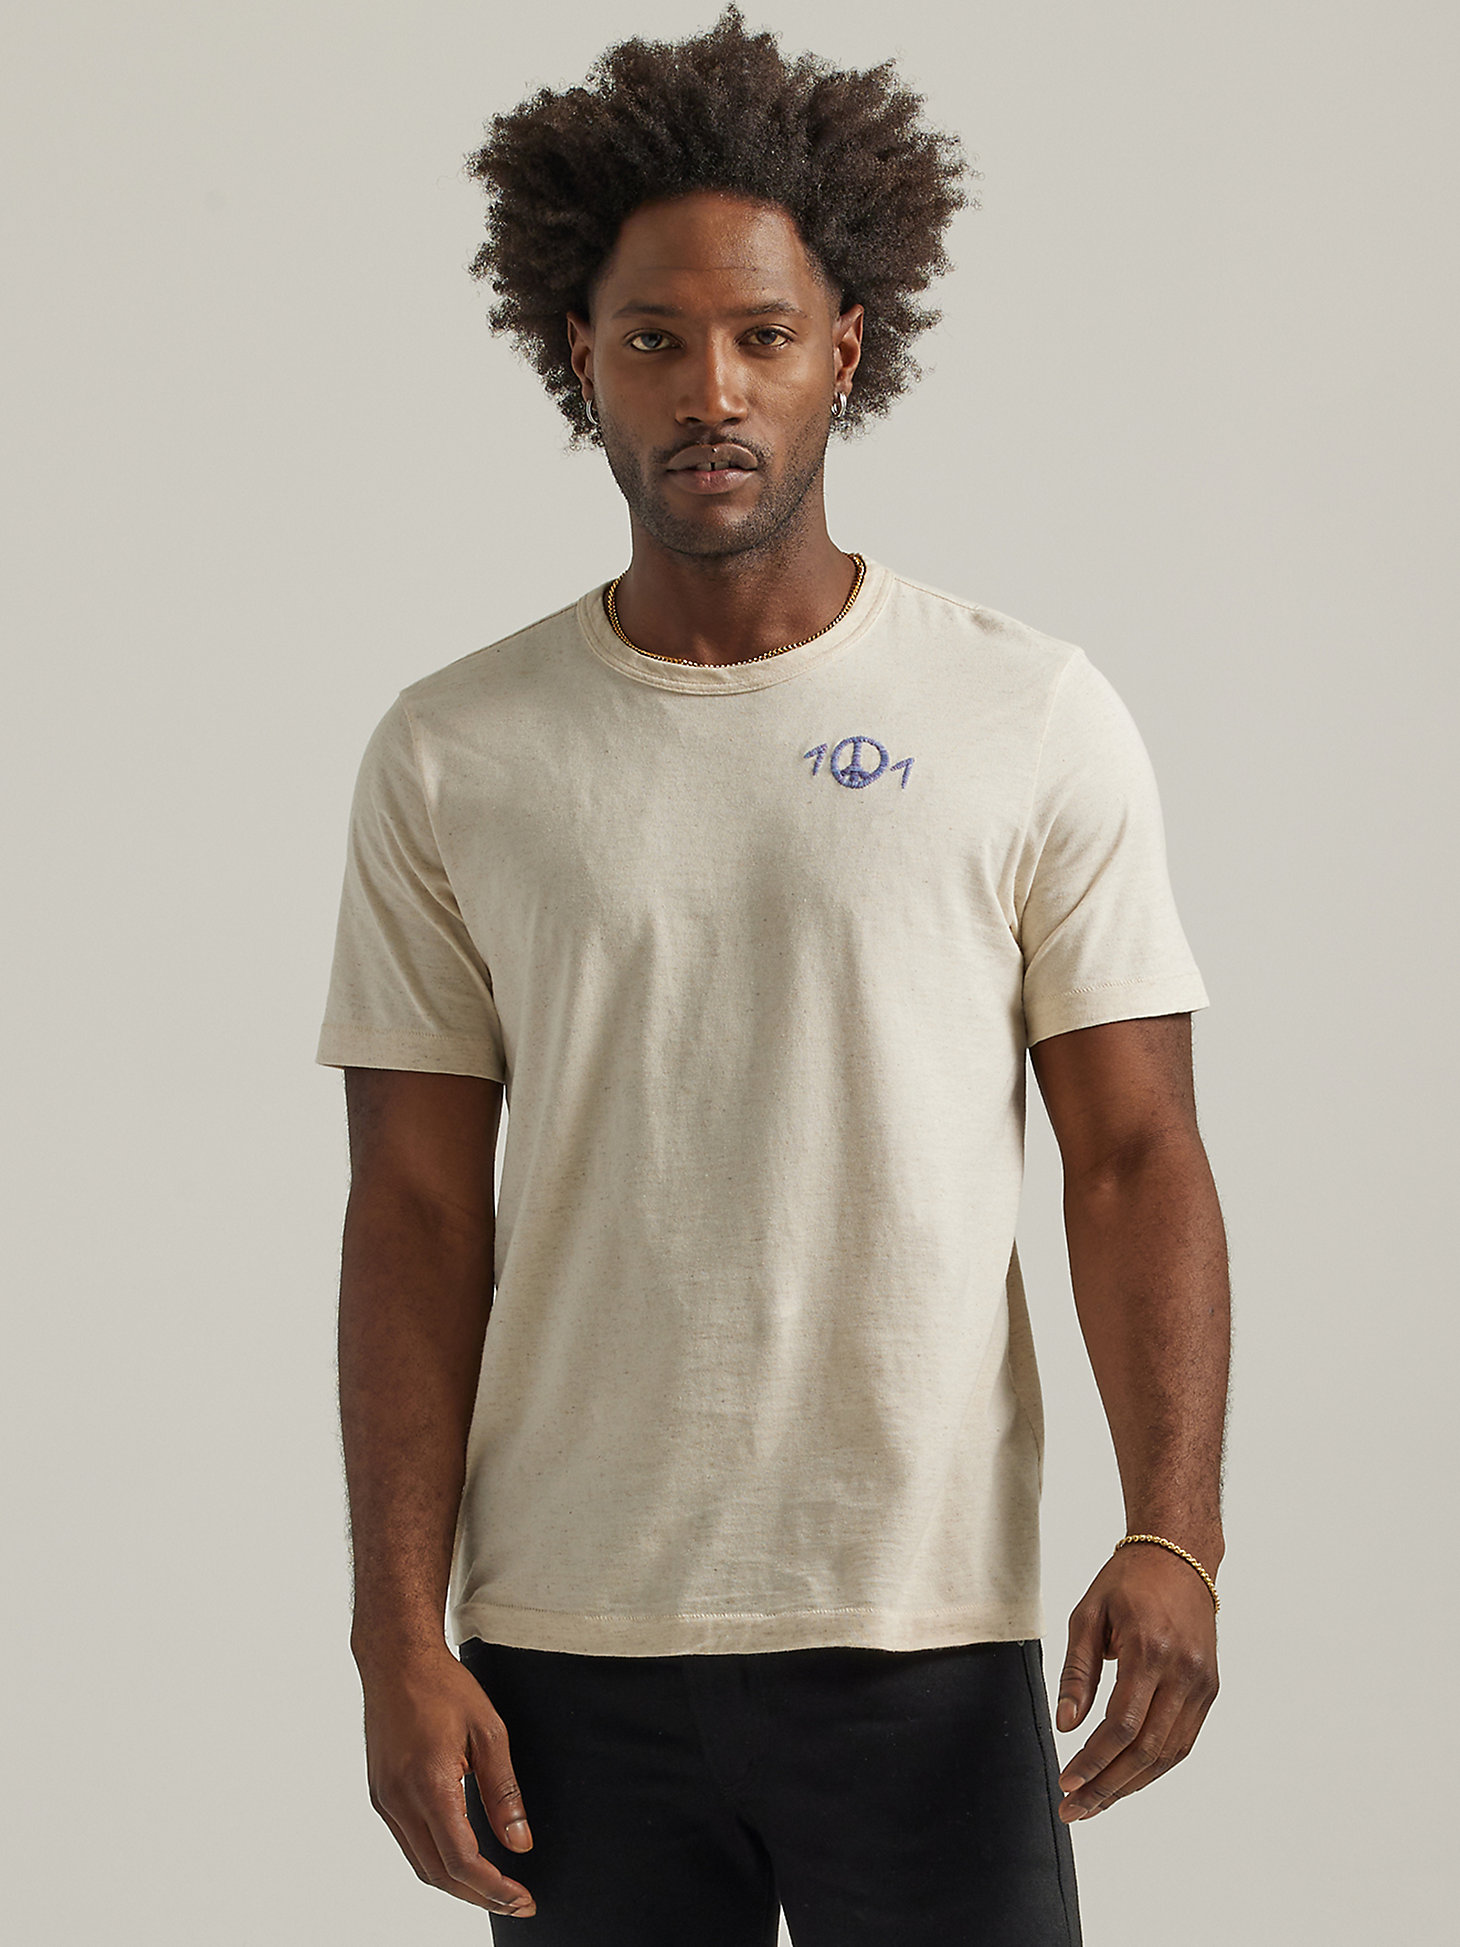 Men's 101 Peace Tee in Raw White main view